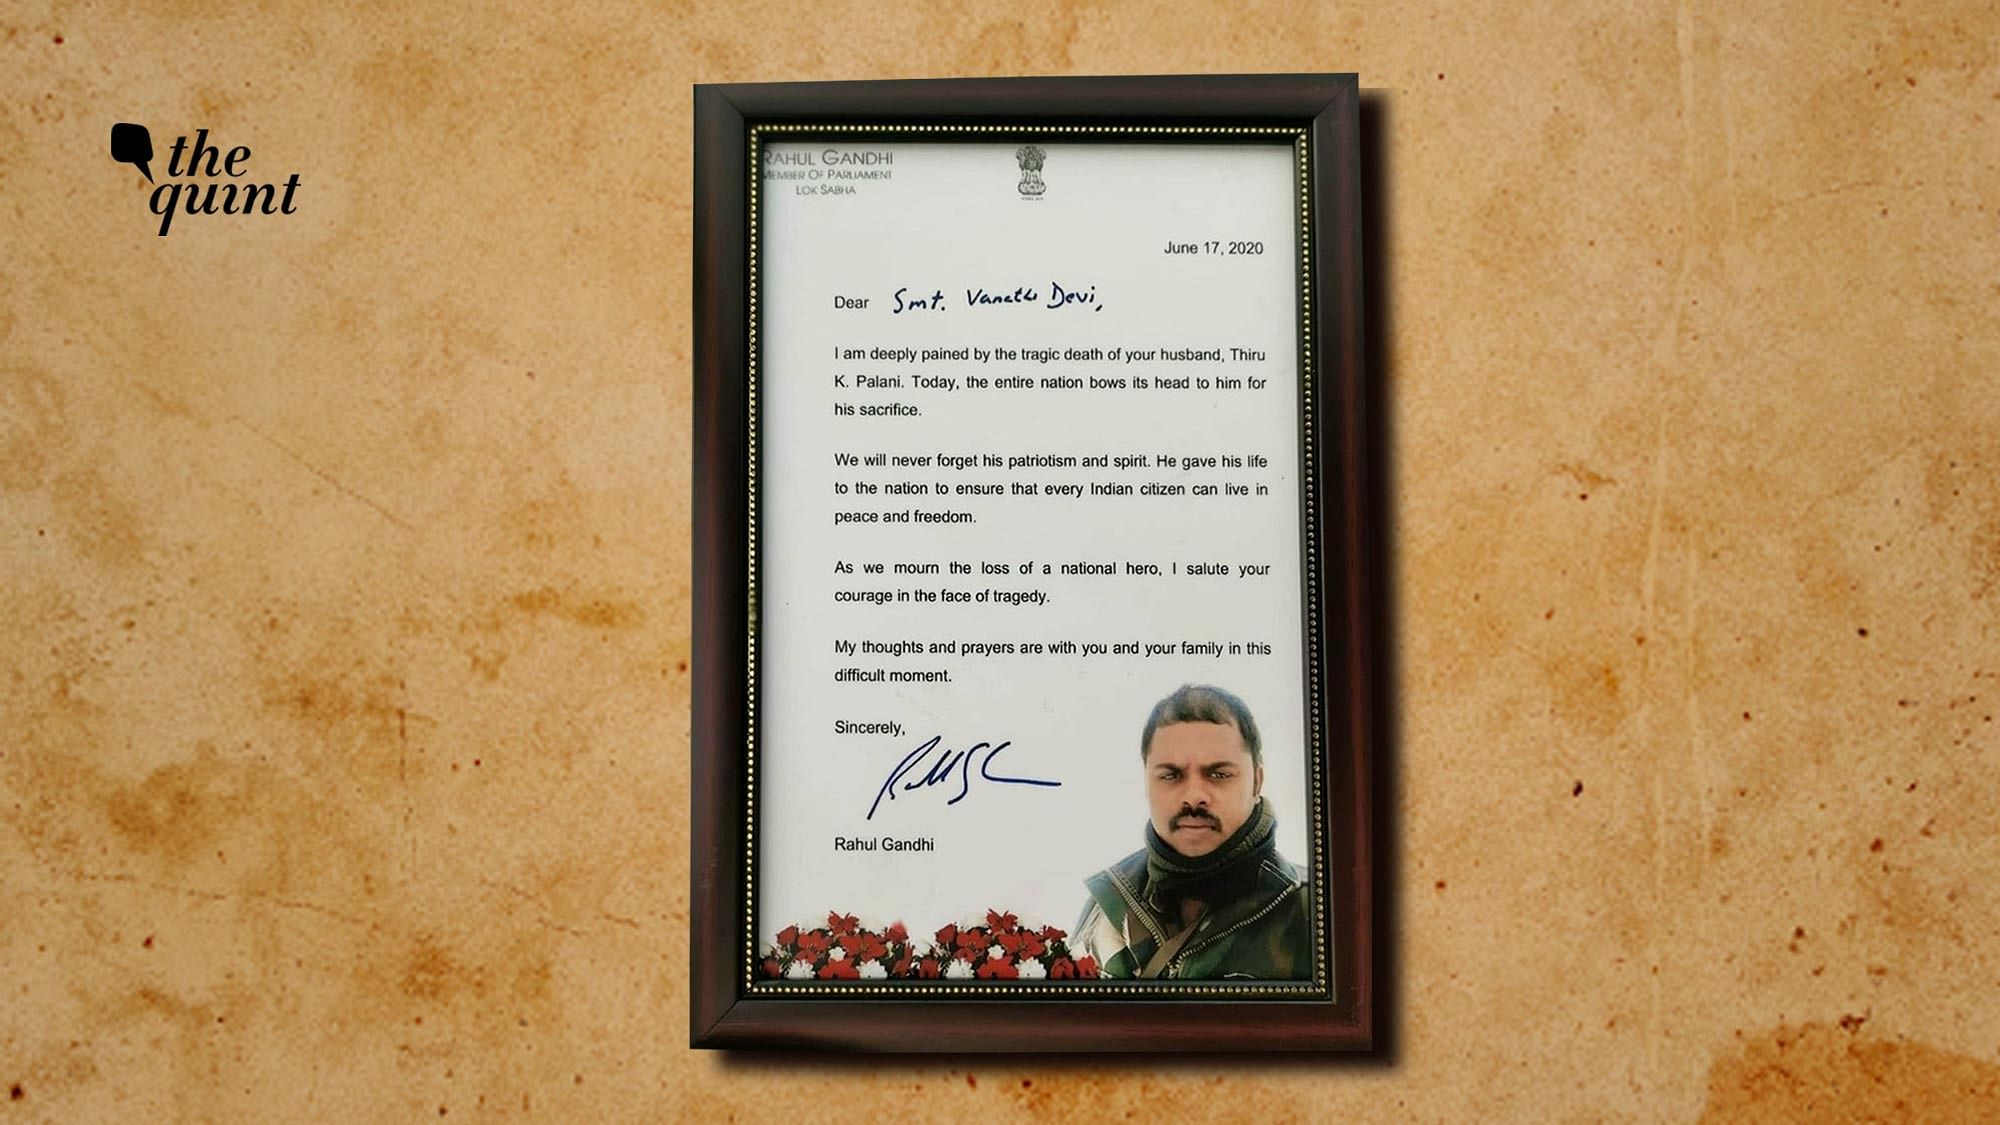 Letter written by Rahul Gandhi to the family of martyred soldier. 